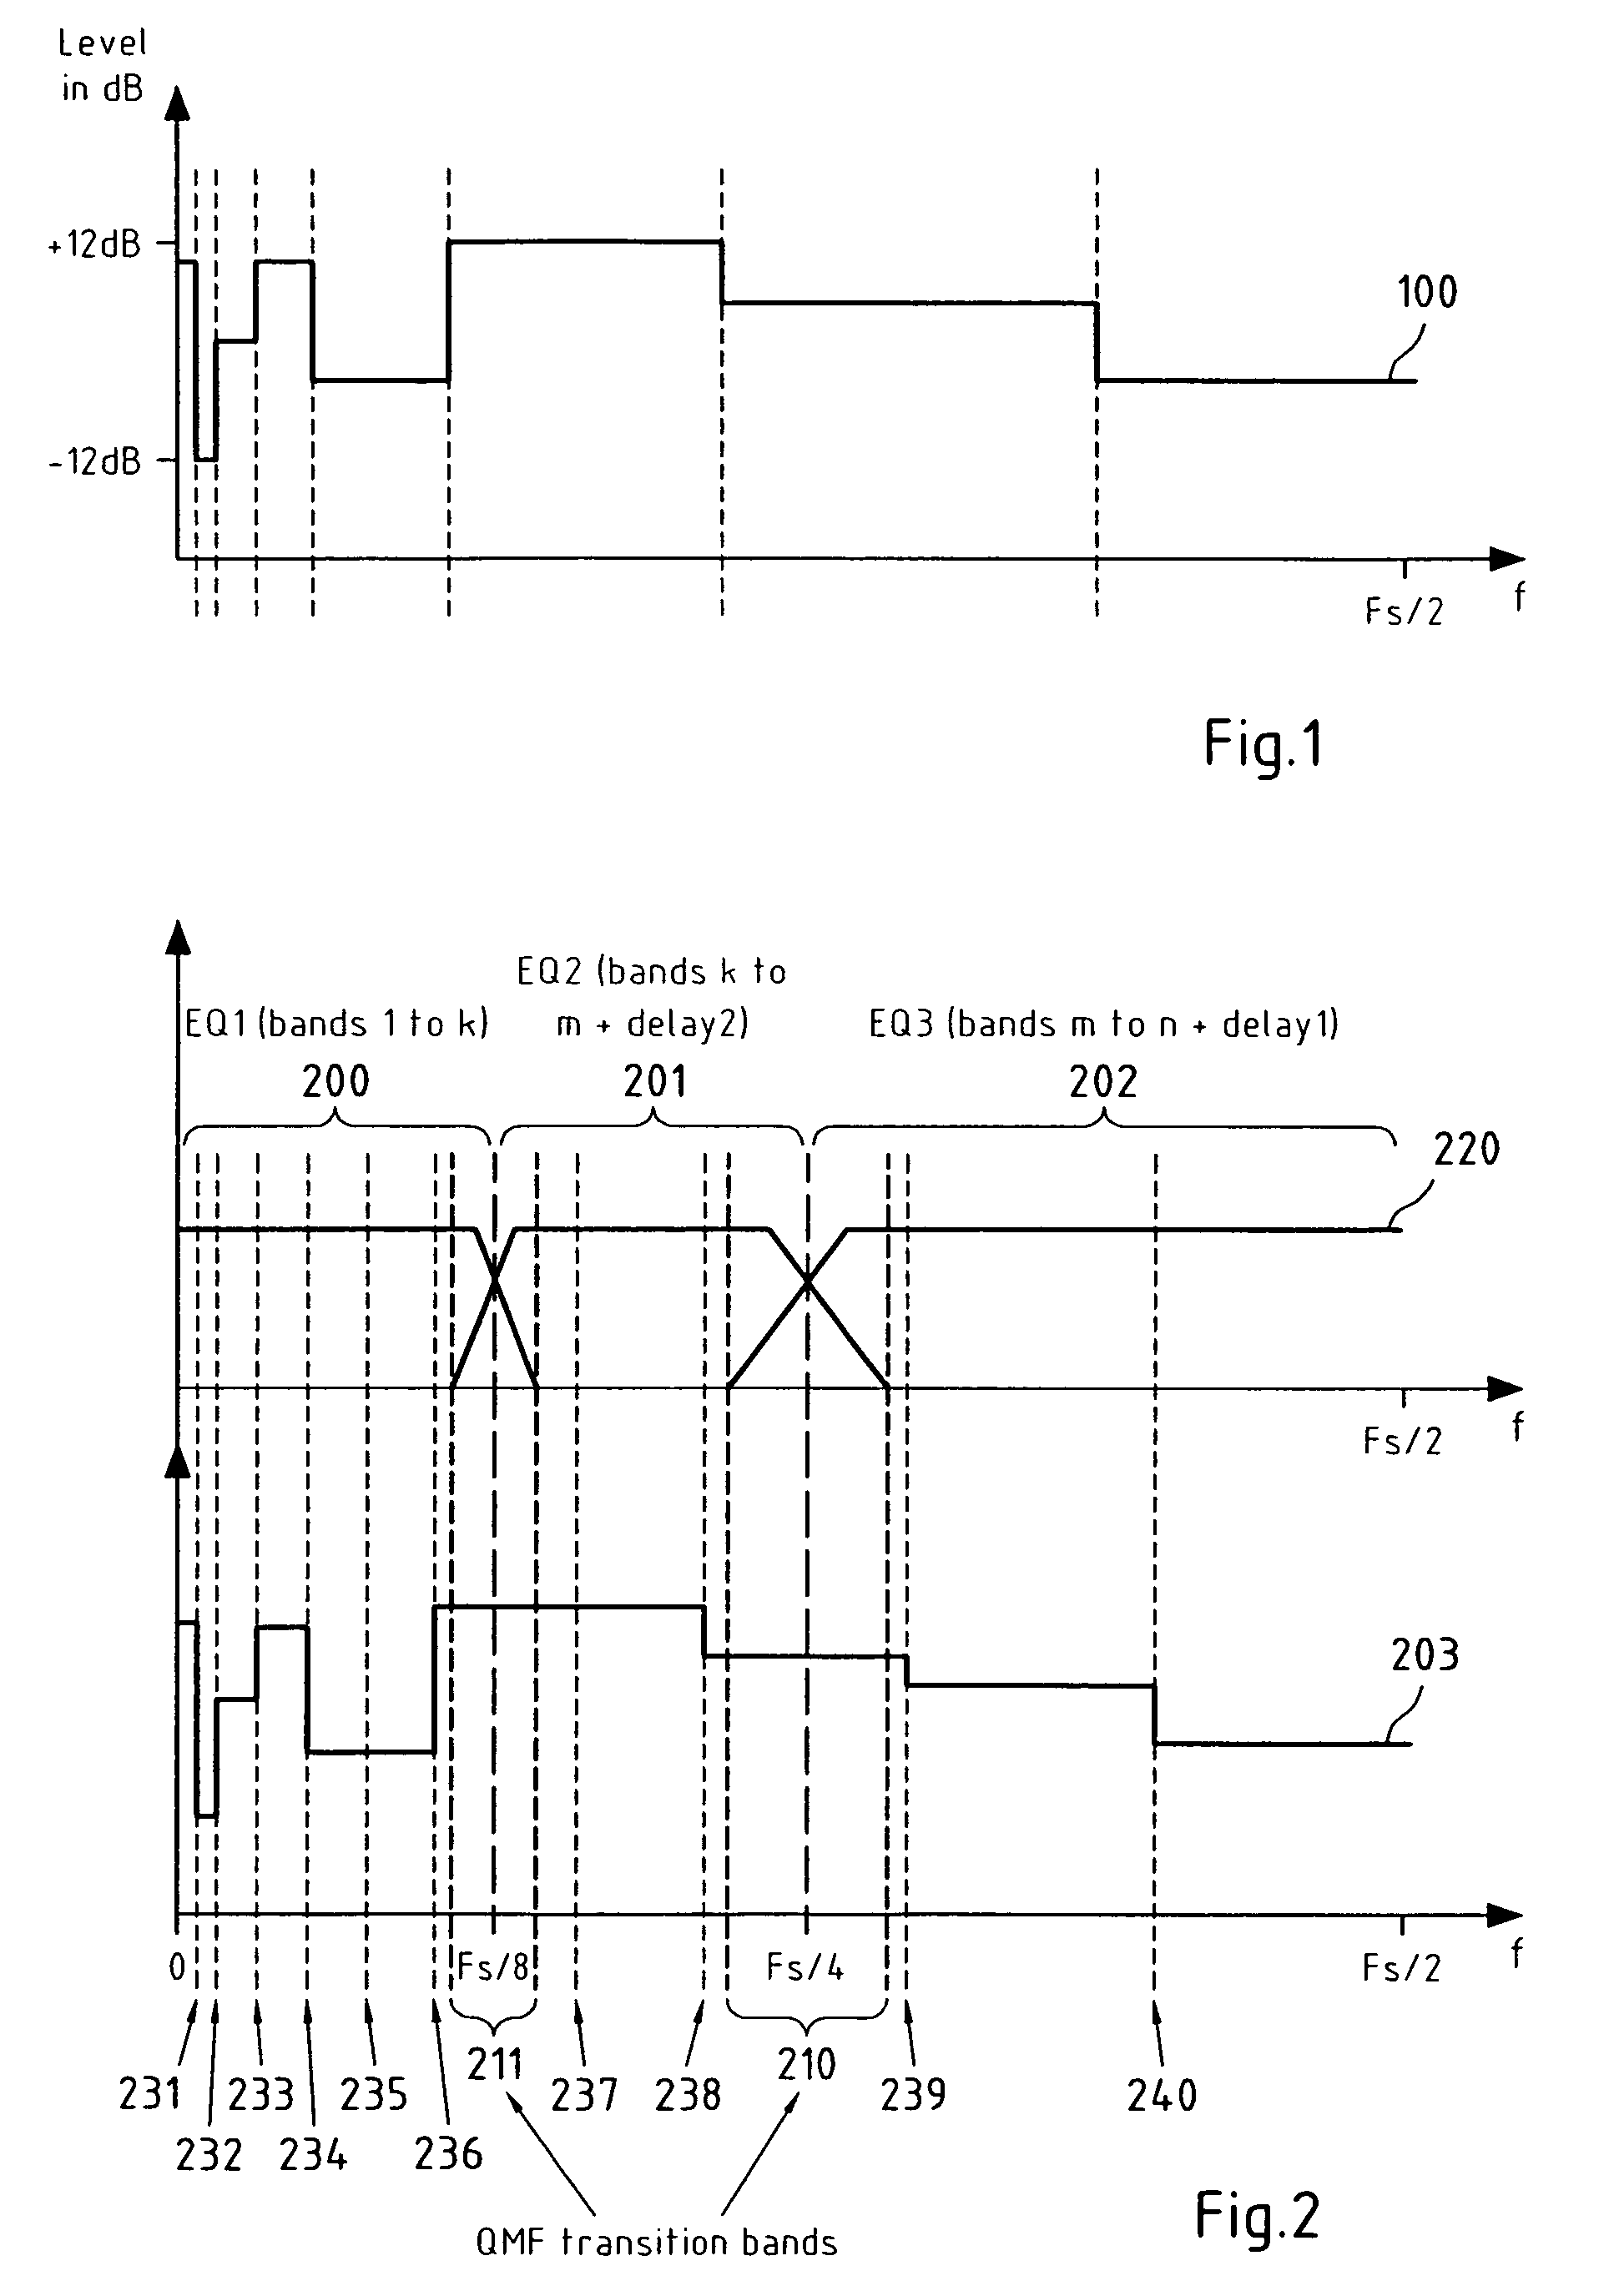 Equalization based on digital signal processing in downsampled domains